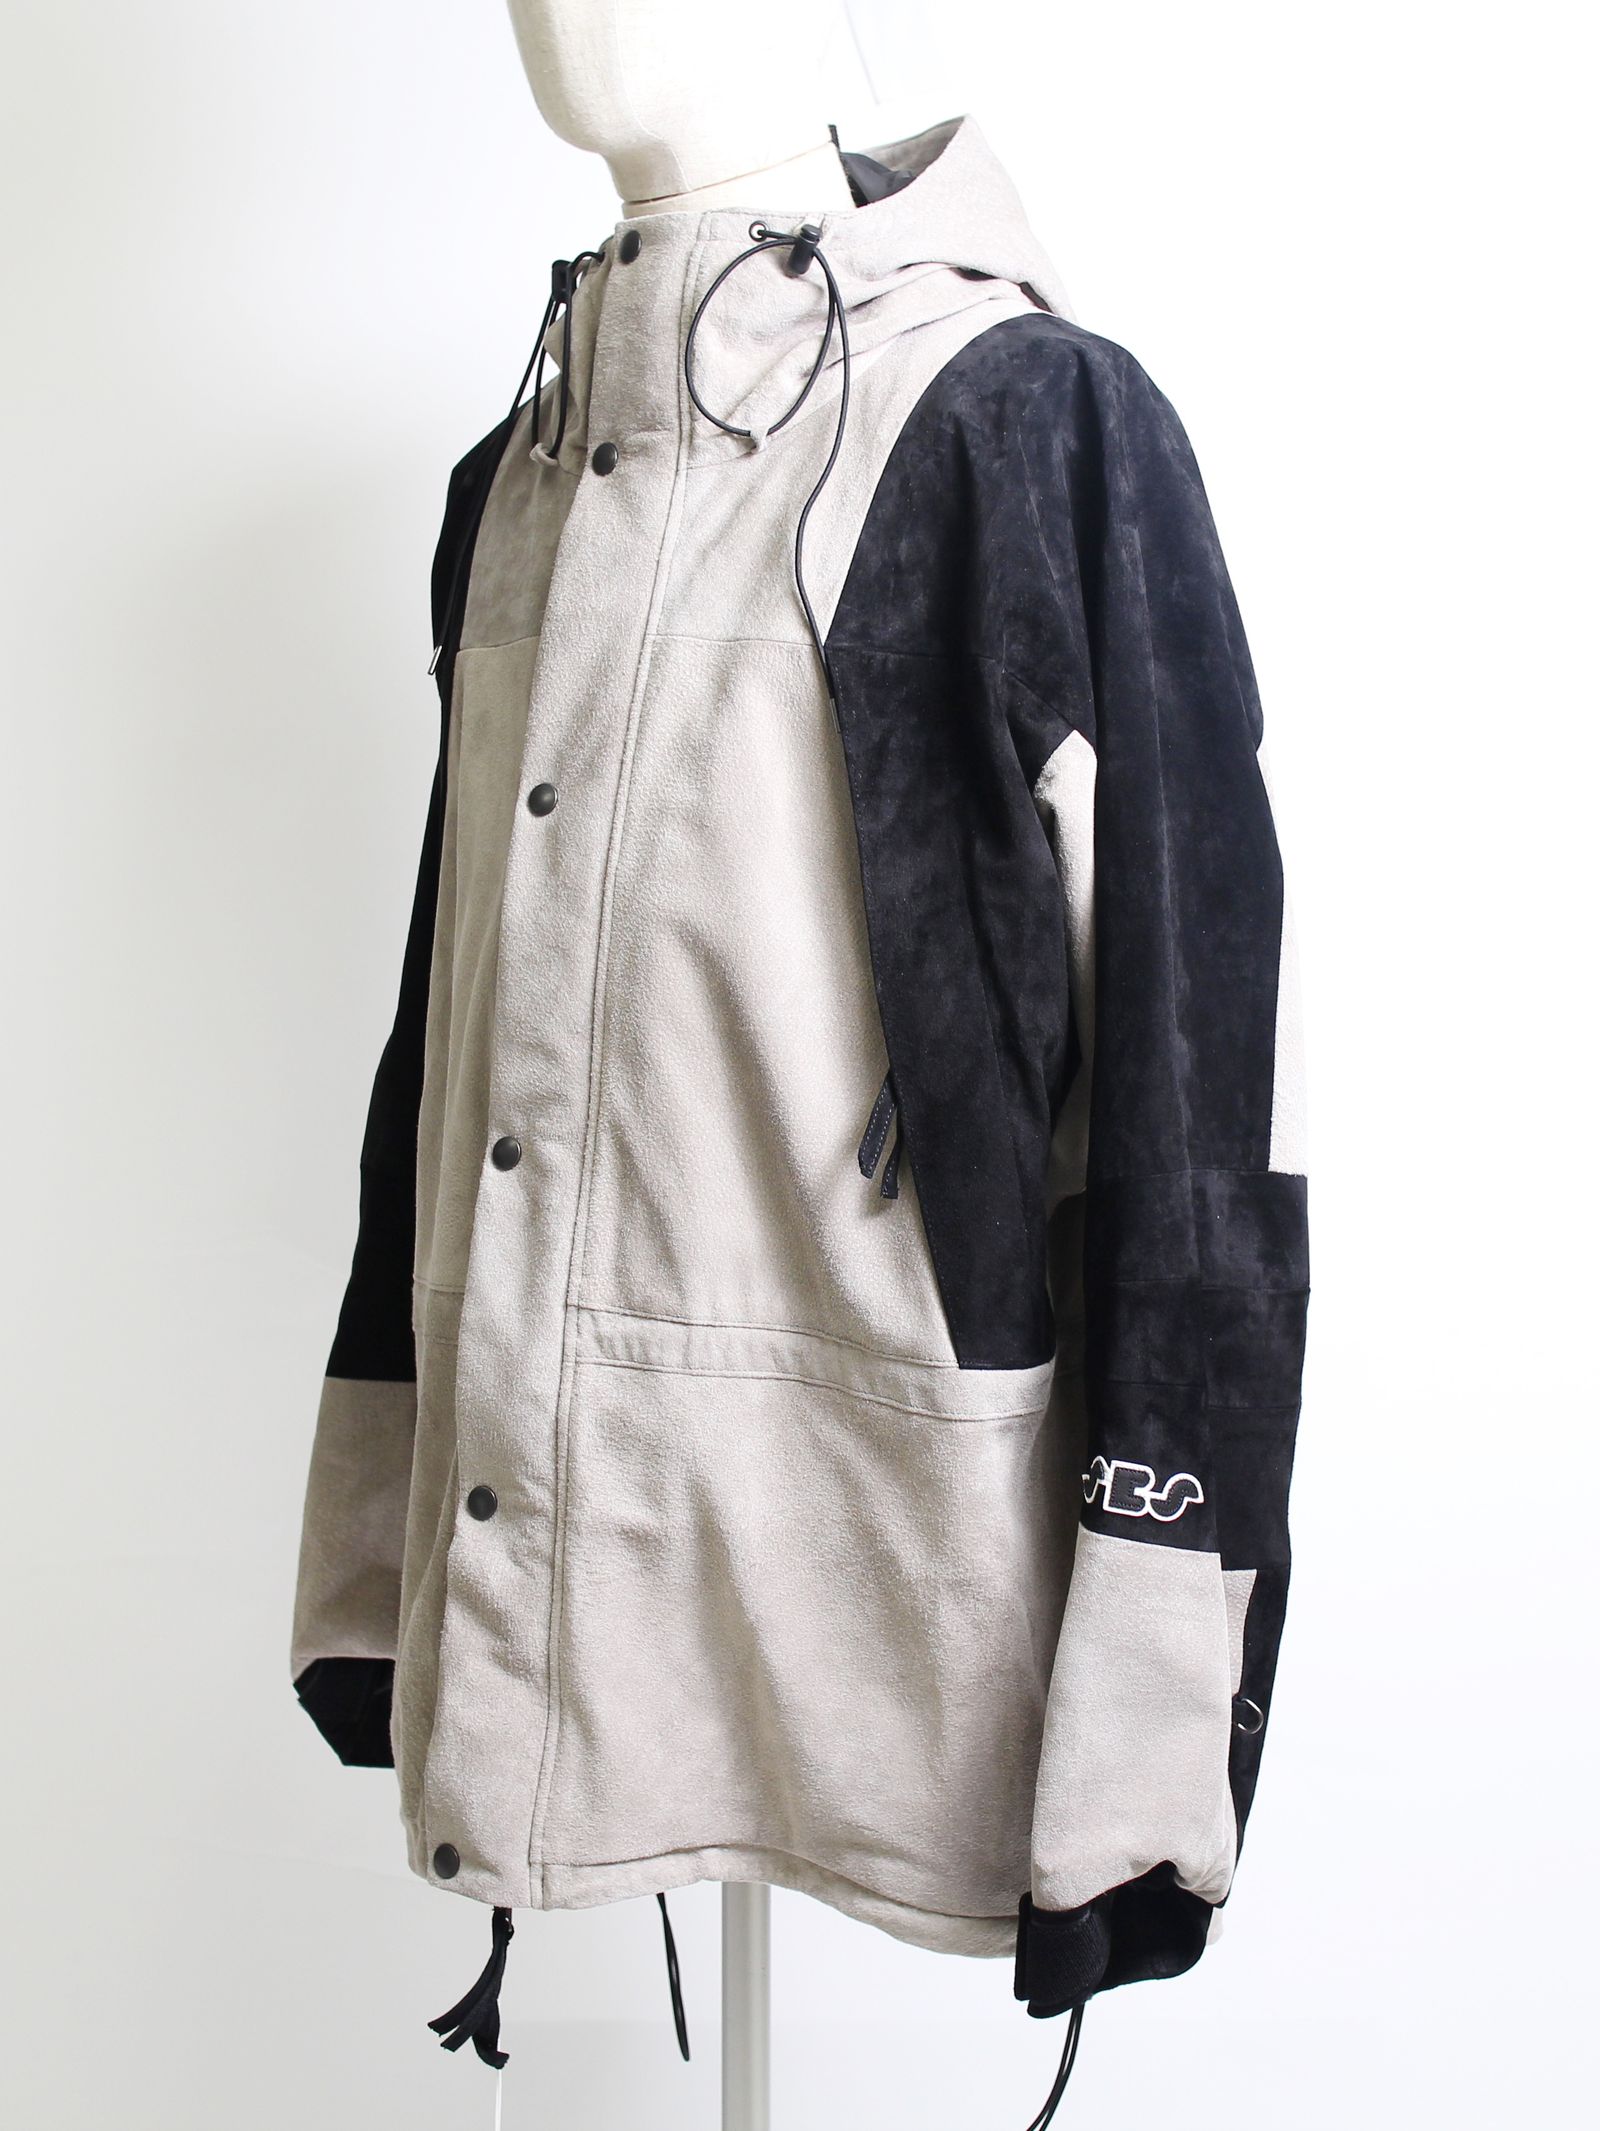 SEVEN BY SEVEN - レザーマウンテンパーカー - LEATHER MOUNTAIN PARKA